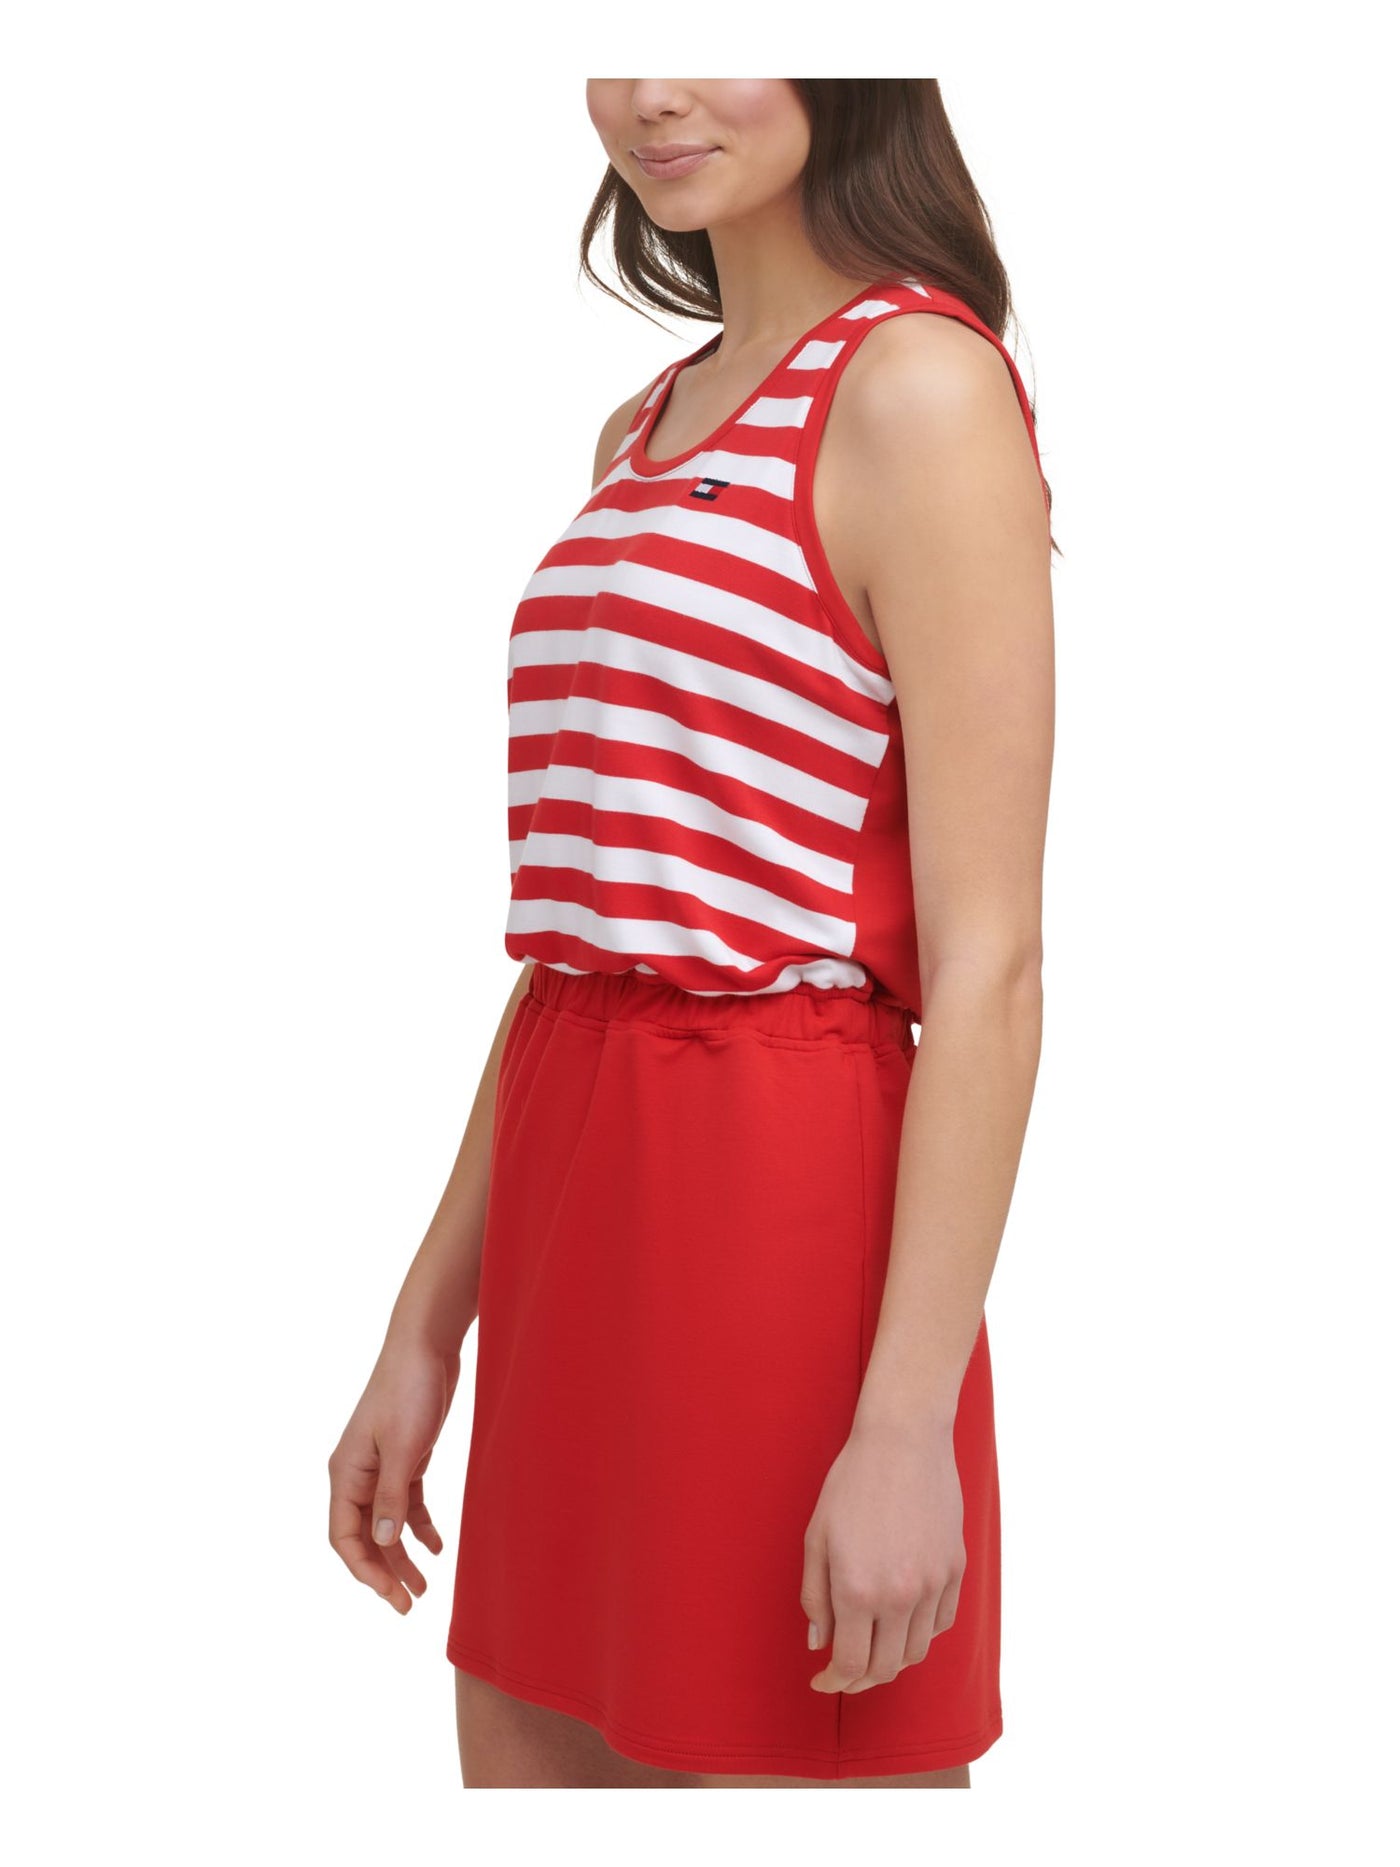 TOMMY HILFIGER SPORT Womens Red Stretch Embroidered Terry Cinched-waist Striped Sleeveless Scoop Neck Short Sheath Dress M